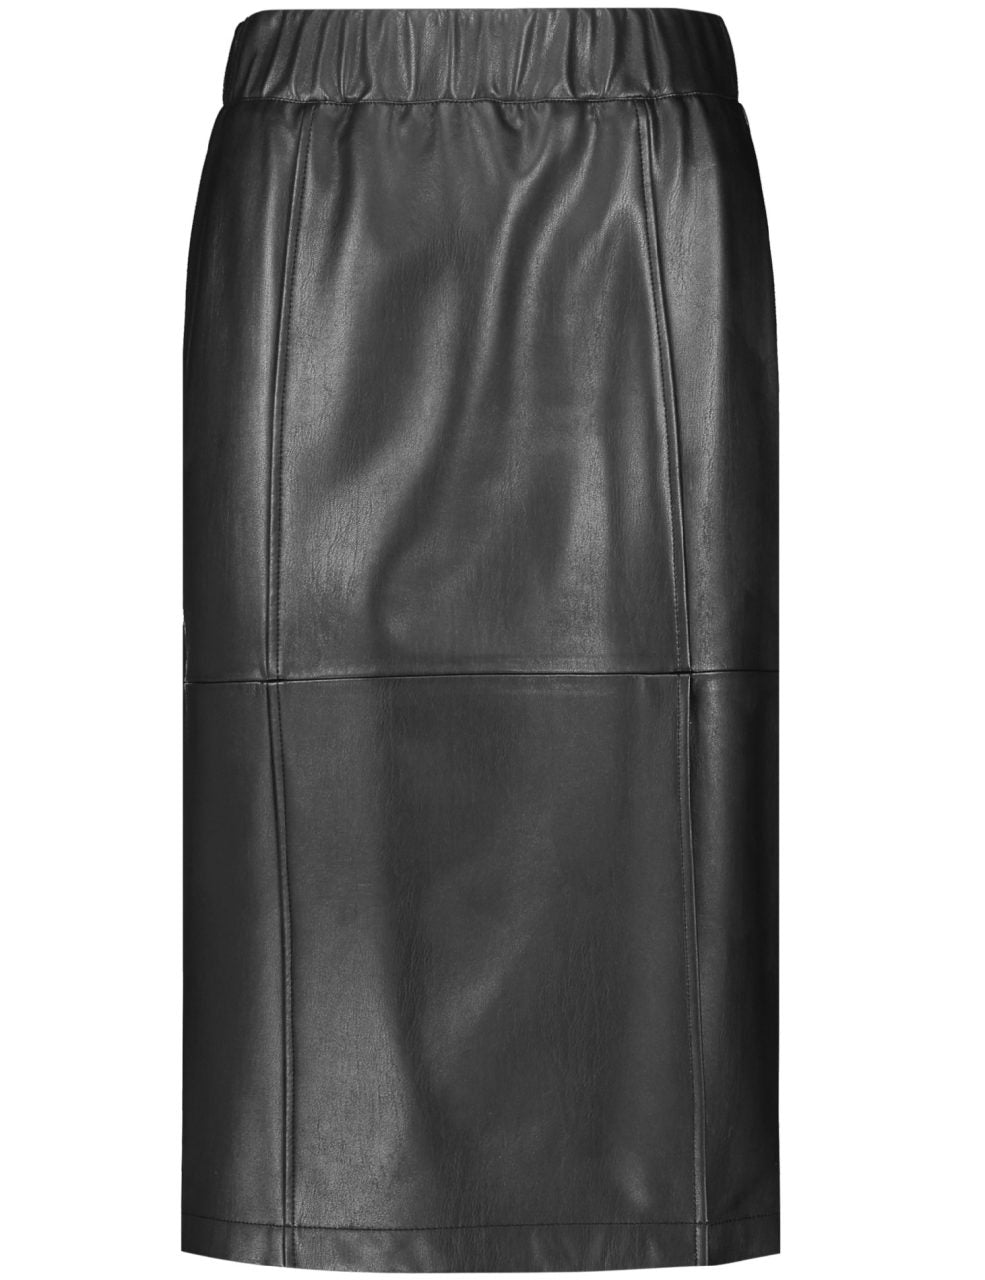 Gerry Weber Faux Leather Skirt